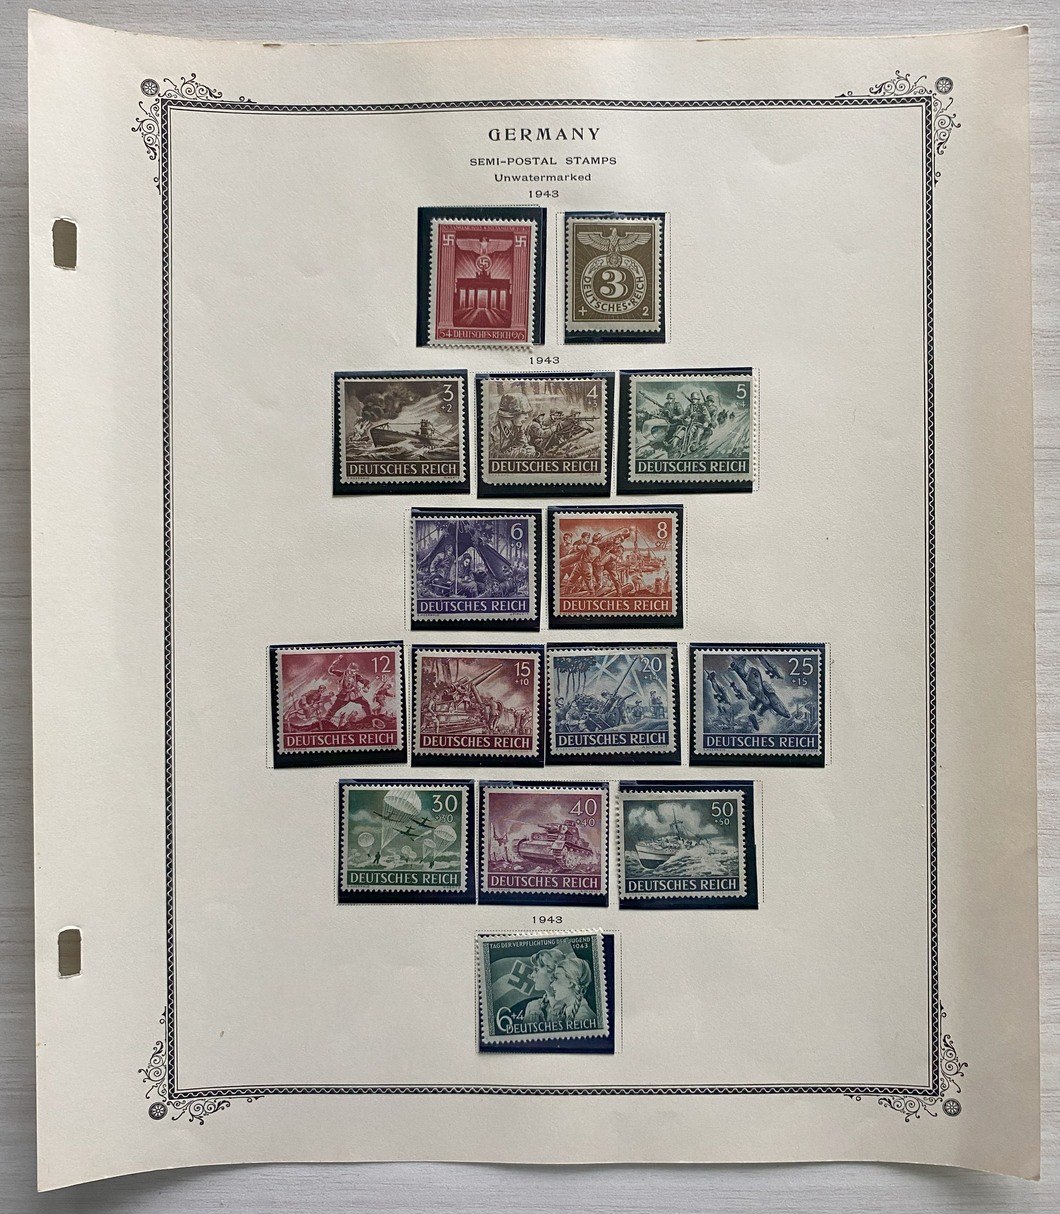 German WWII Nazi Third Reich 1943 15 Stamps From Original Postal Collection - Very Rare Find